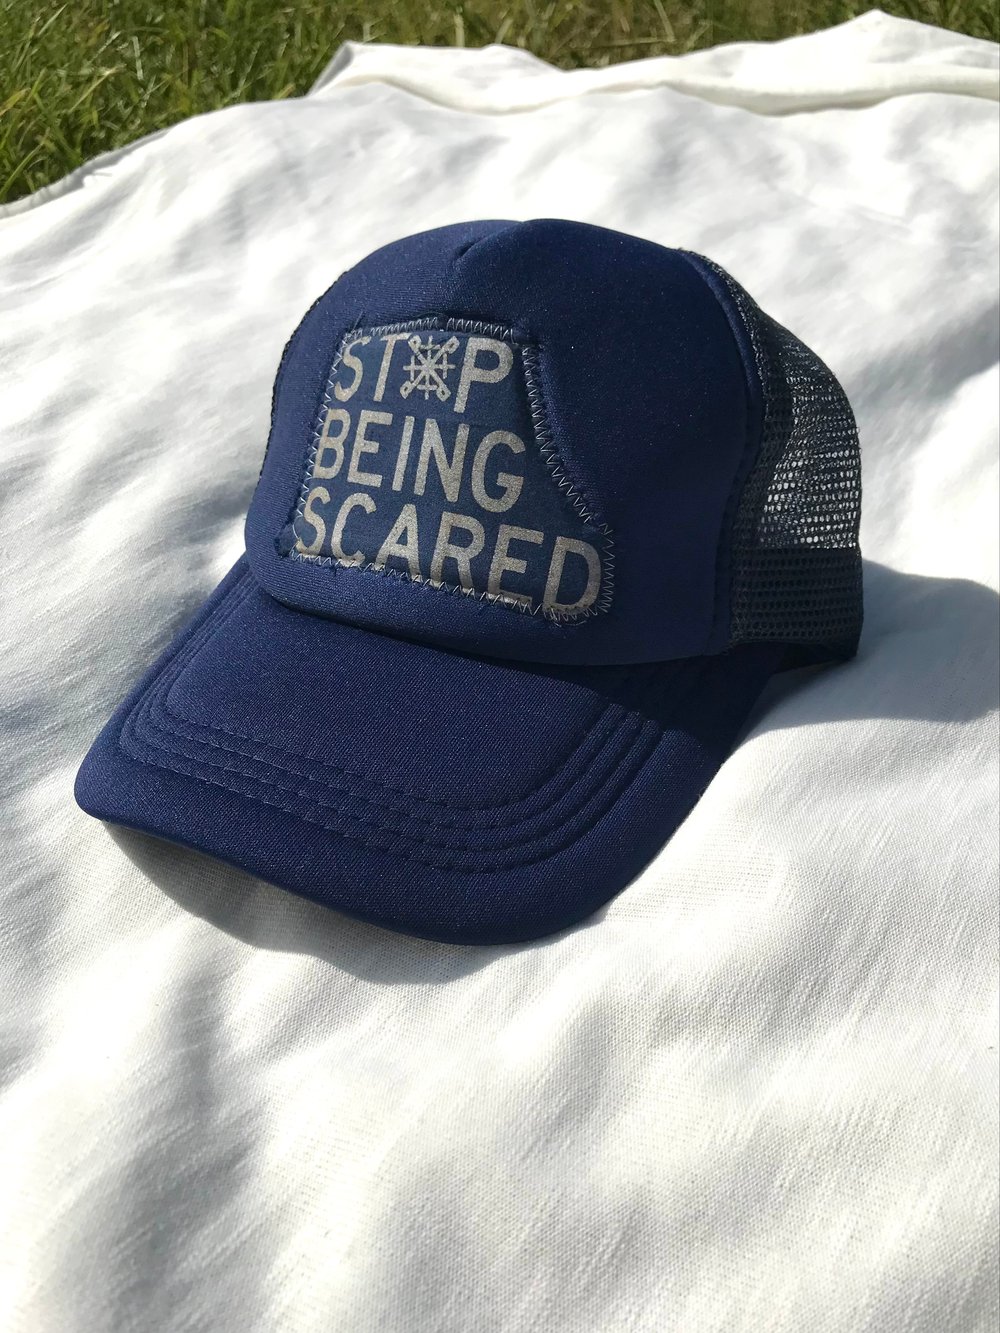 the stop being scared trucker cap in navy blue